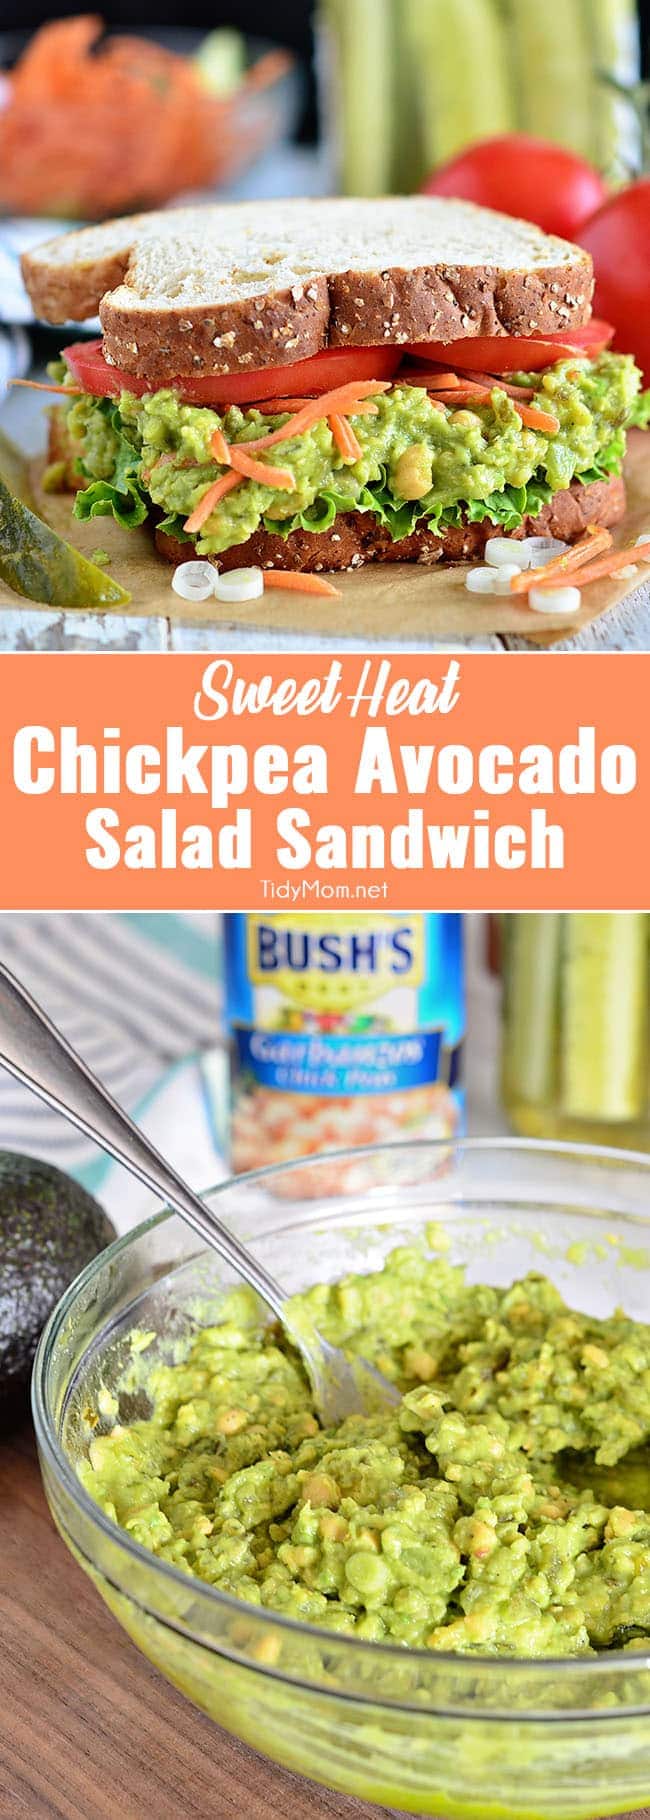 Smashed chickpeas (garbanzo beans) and avocado together make the most delicious sandwich spread! Get this Sweet Heat Chickpea Avocado Salad Sandwich recipe at TidyMom.net